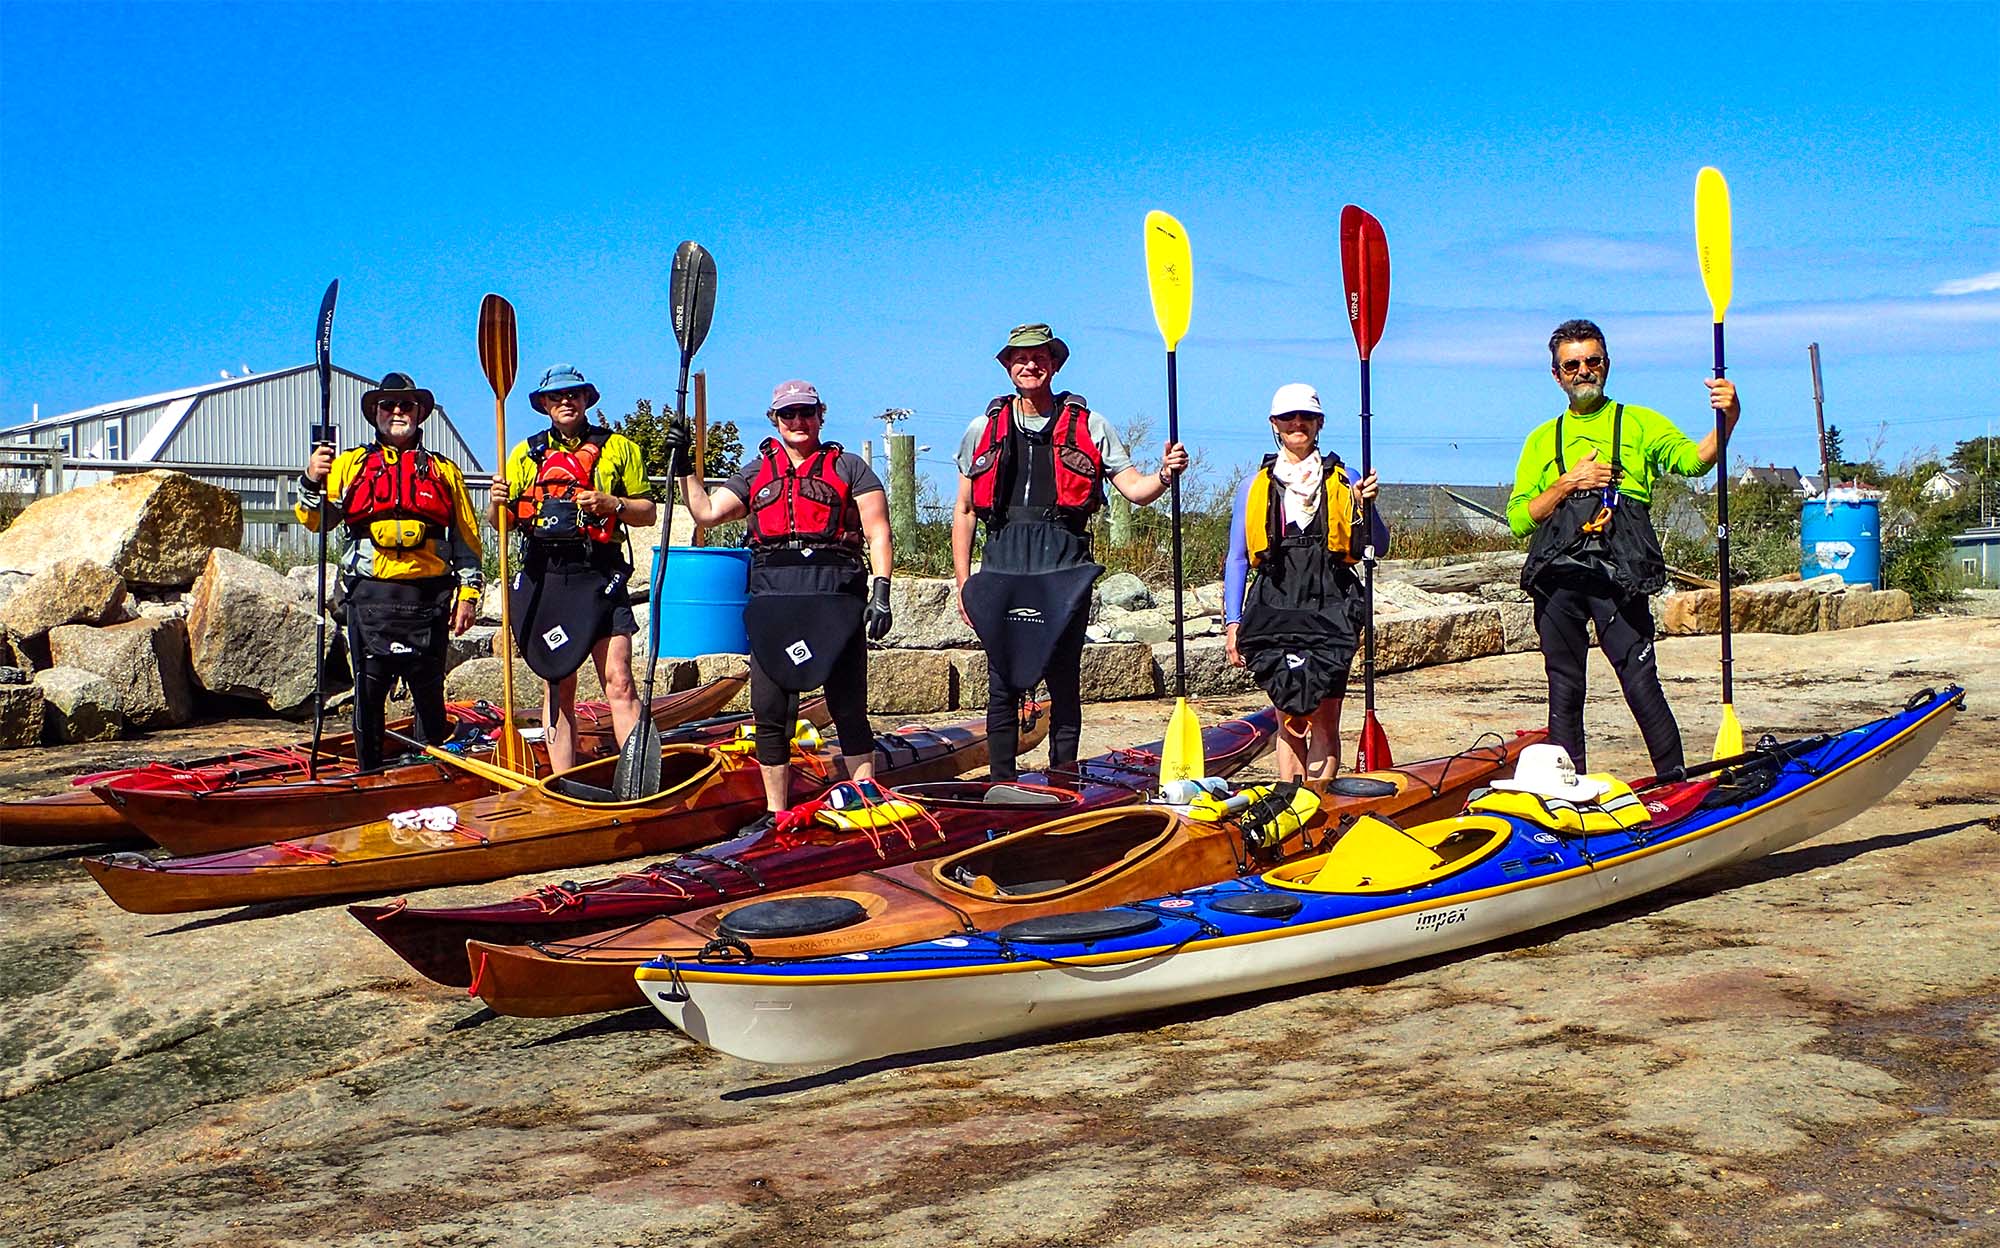 Join this sea kayaking class in Maine